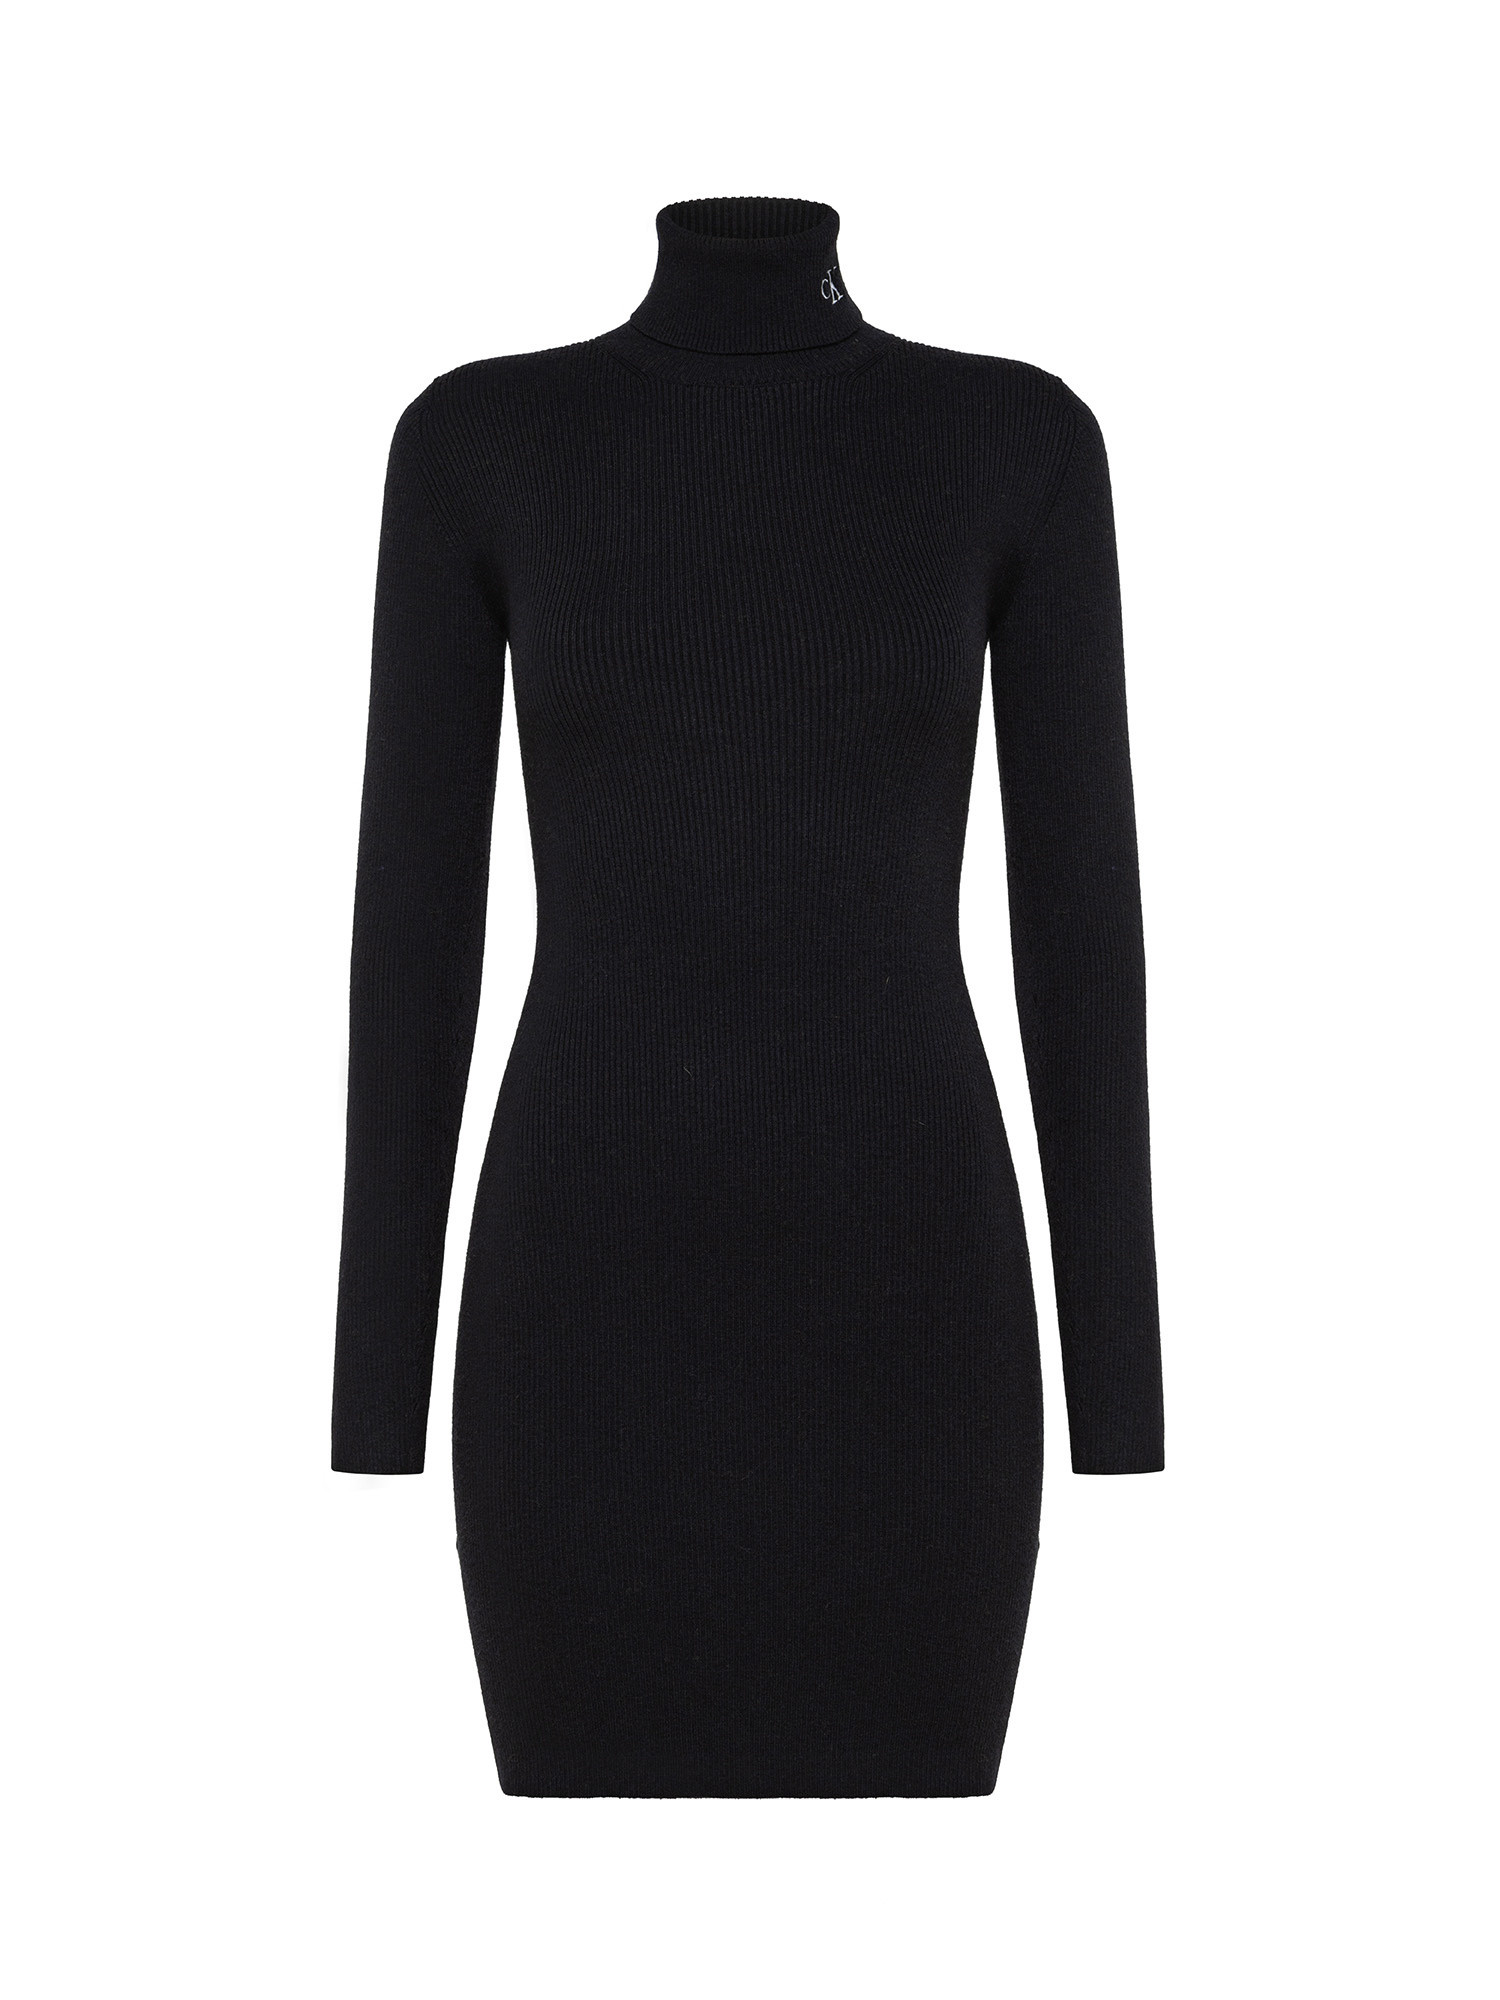 Ribbed dress with high collar, Black, large image number 1